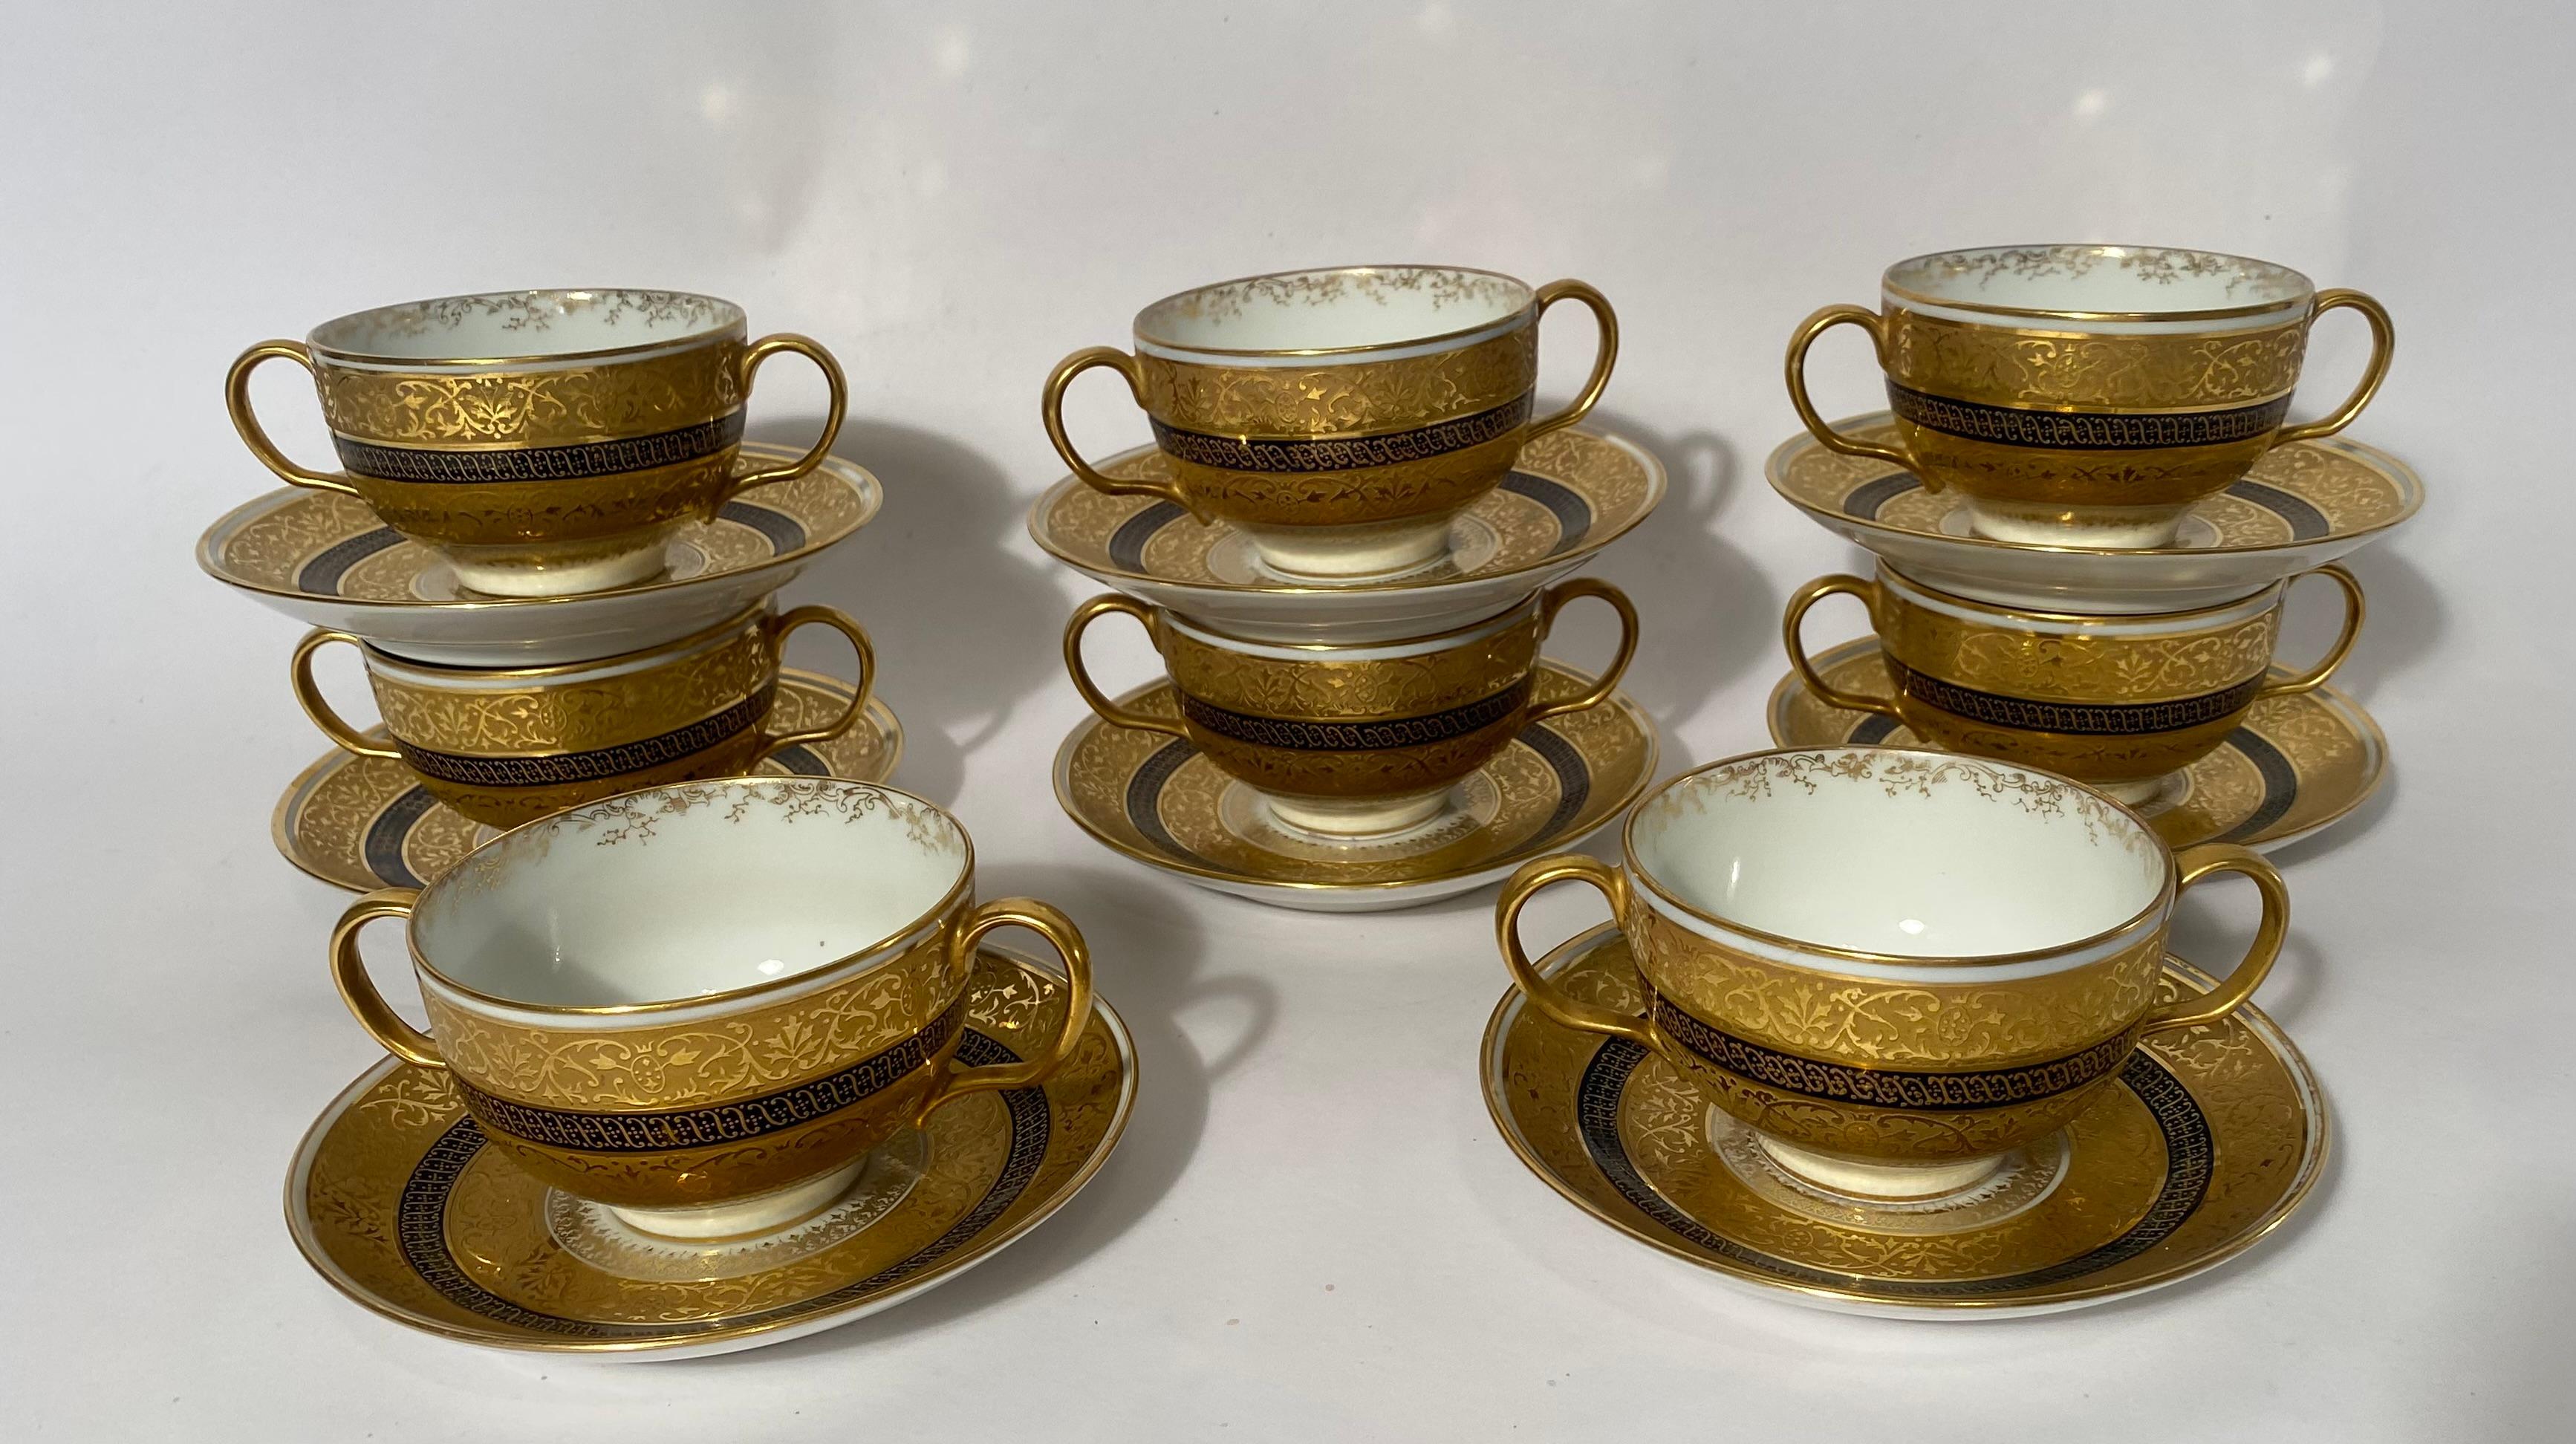 Late 19th Century A Set of 8 Cream Soup or Dessert Cups & Saucers. Antique Limoges Circa 1890 